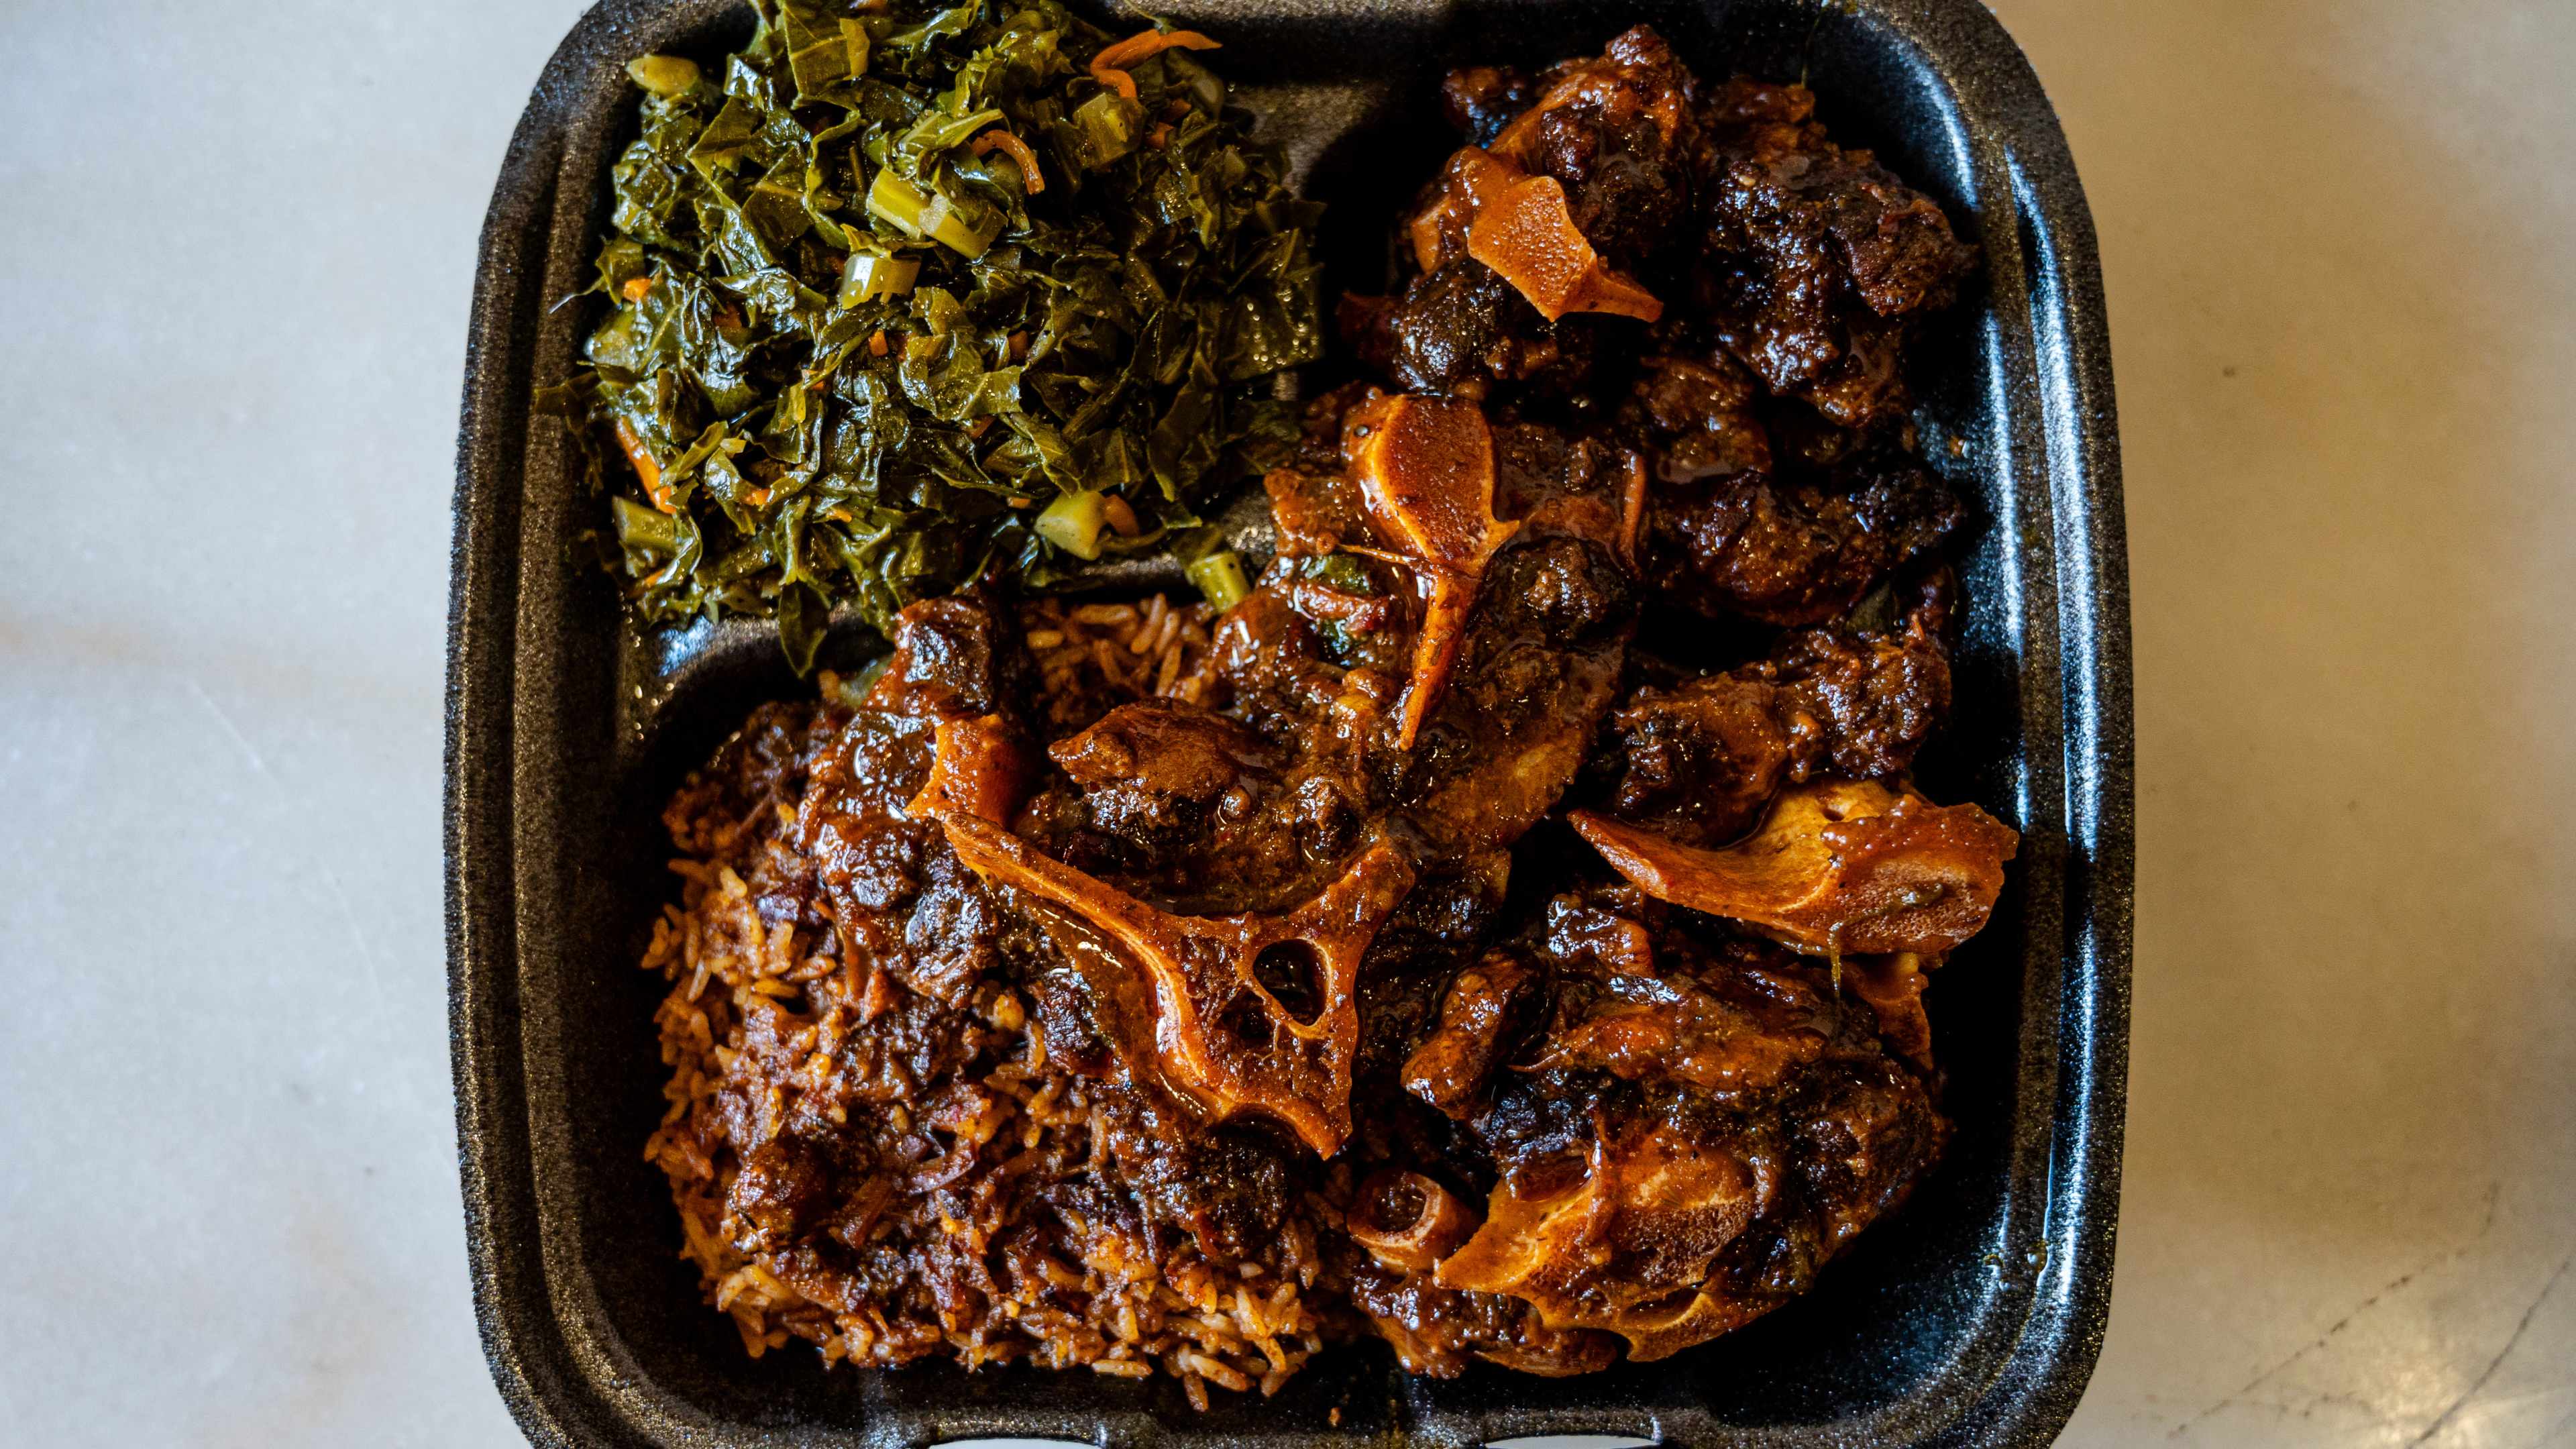 This is an oxtails platter from Kingston 11.